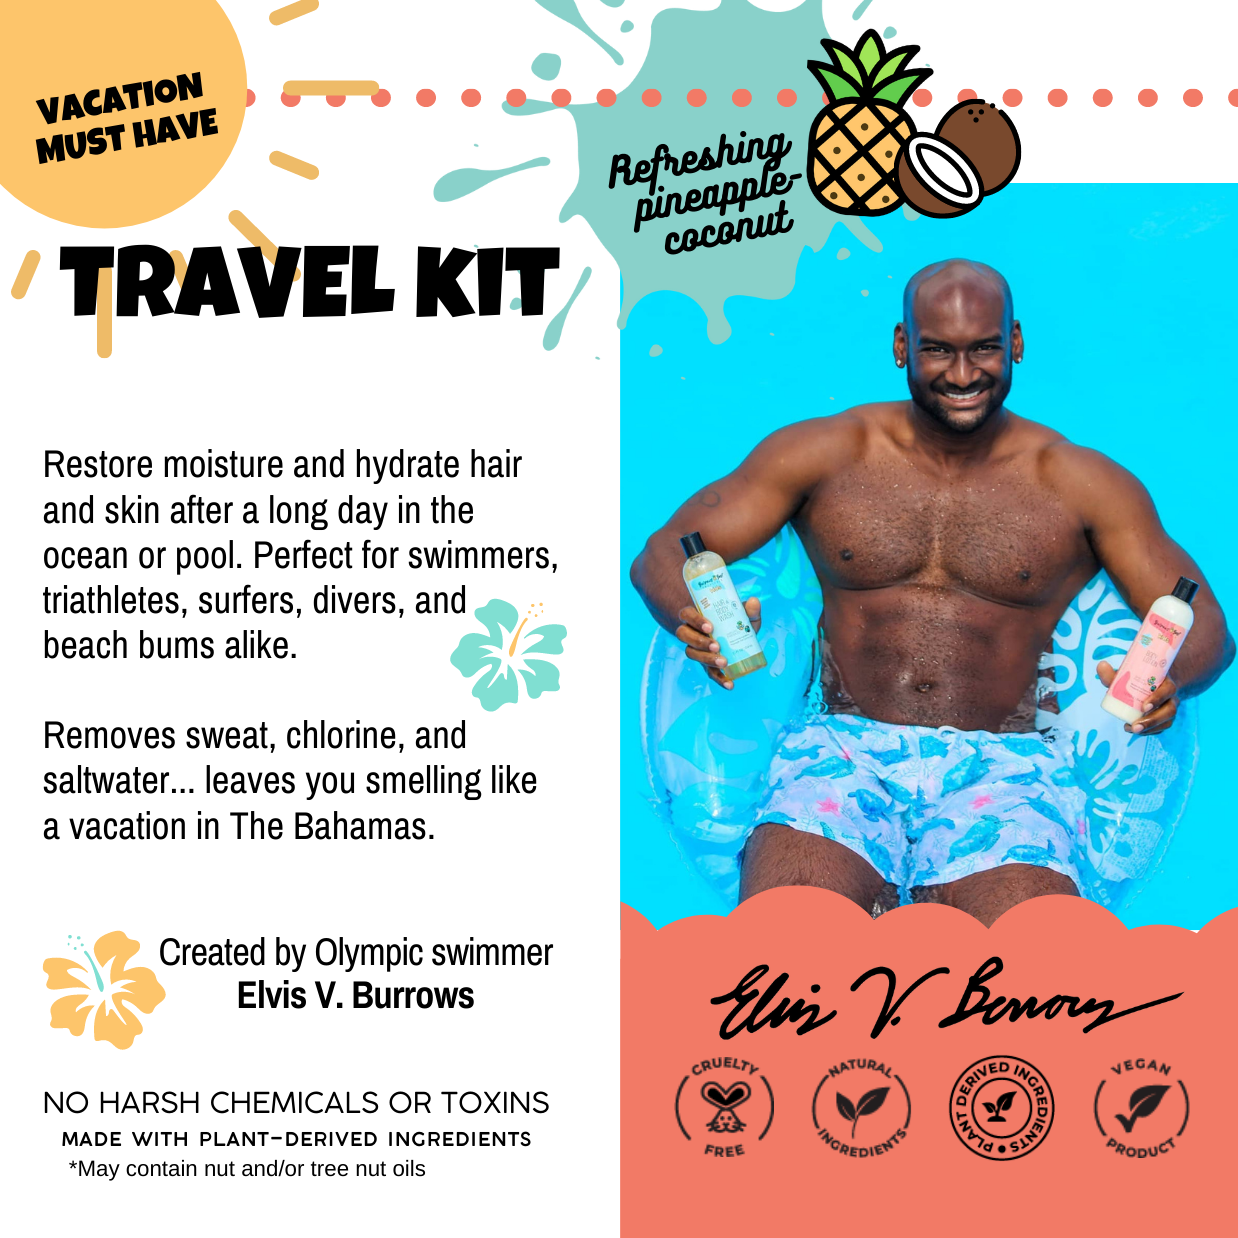 Olympic swimmer Elvis v Burrows in the swimming pool sitting in a float holding bottles of burrows best, overlapped by his signature. Text reads Travel kit. Vacation must have. Created by Olympic swimmer Elvis V Burrows. Refreshing pineapple-coconut scent.